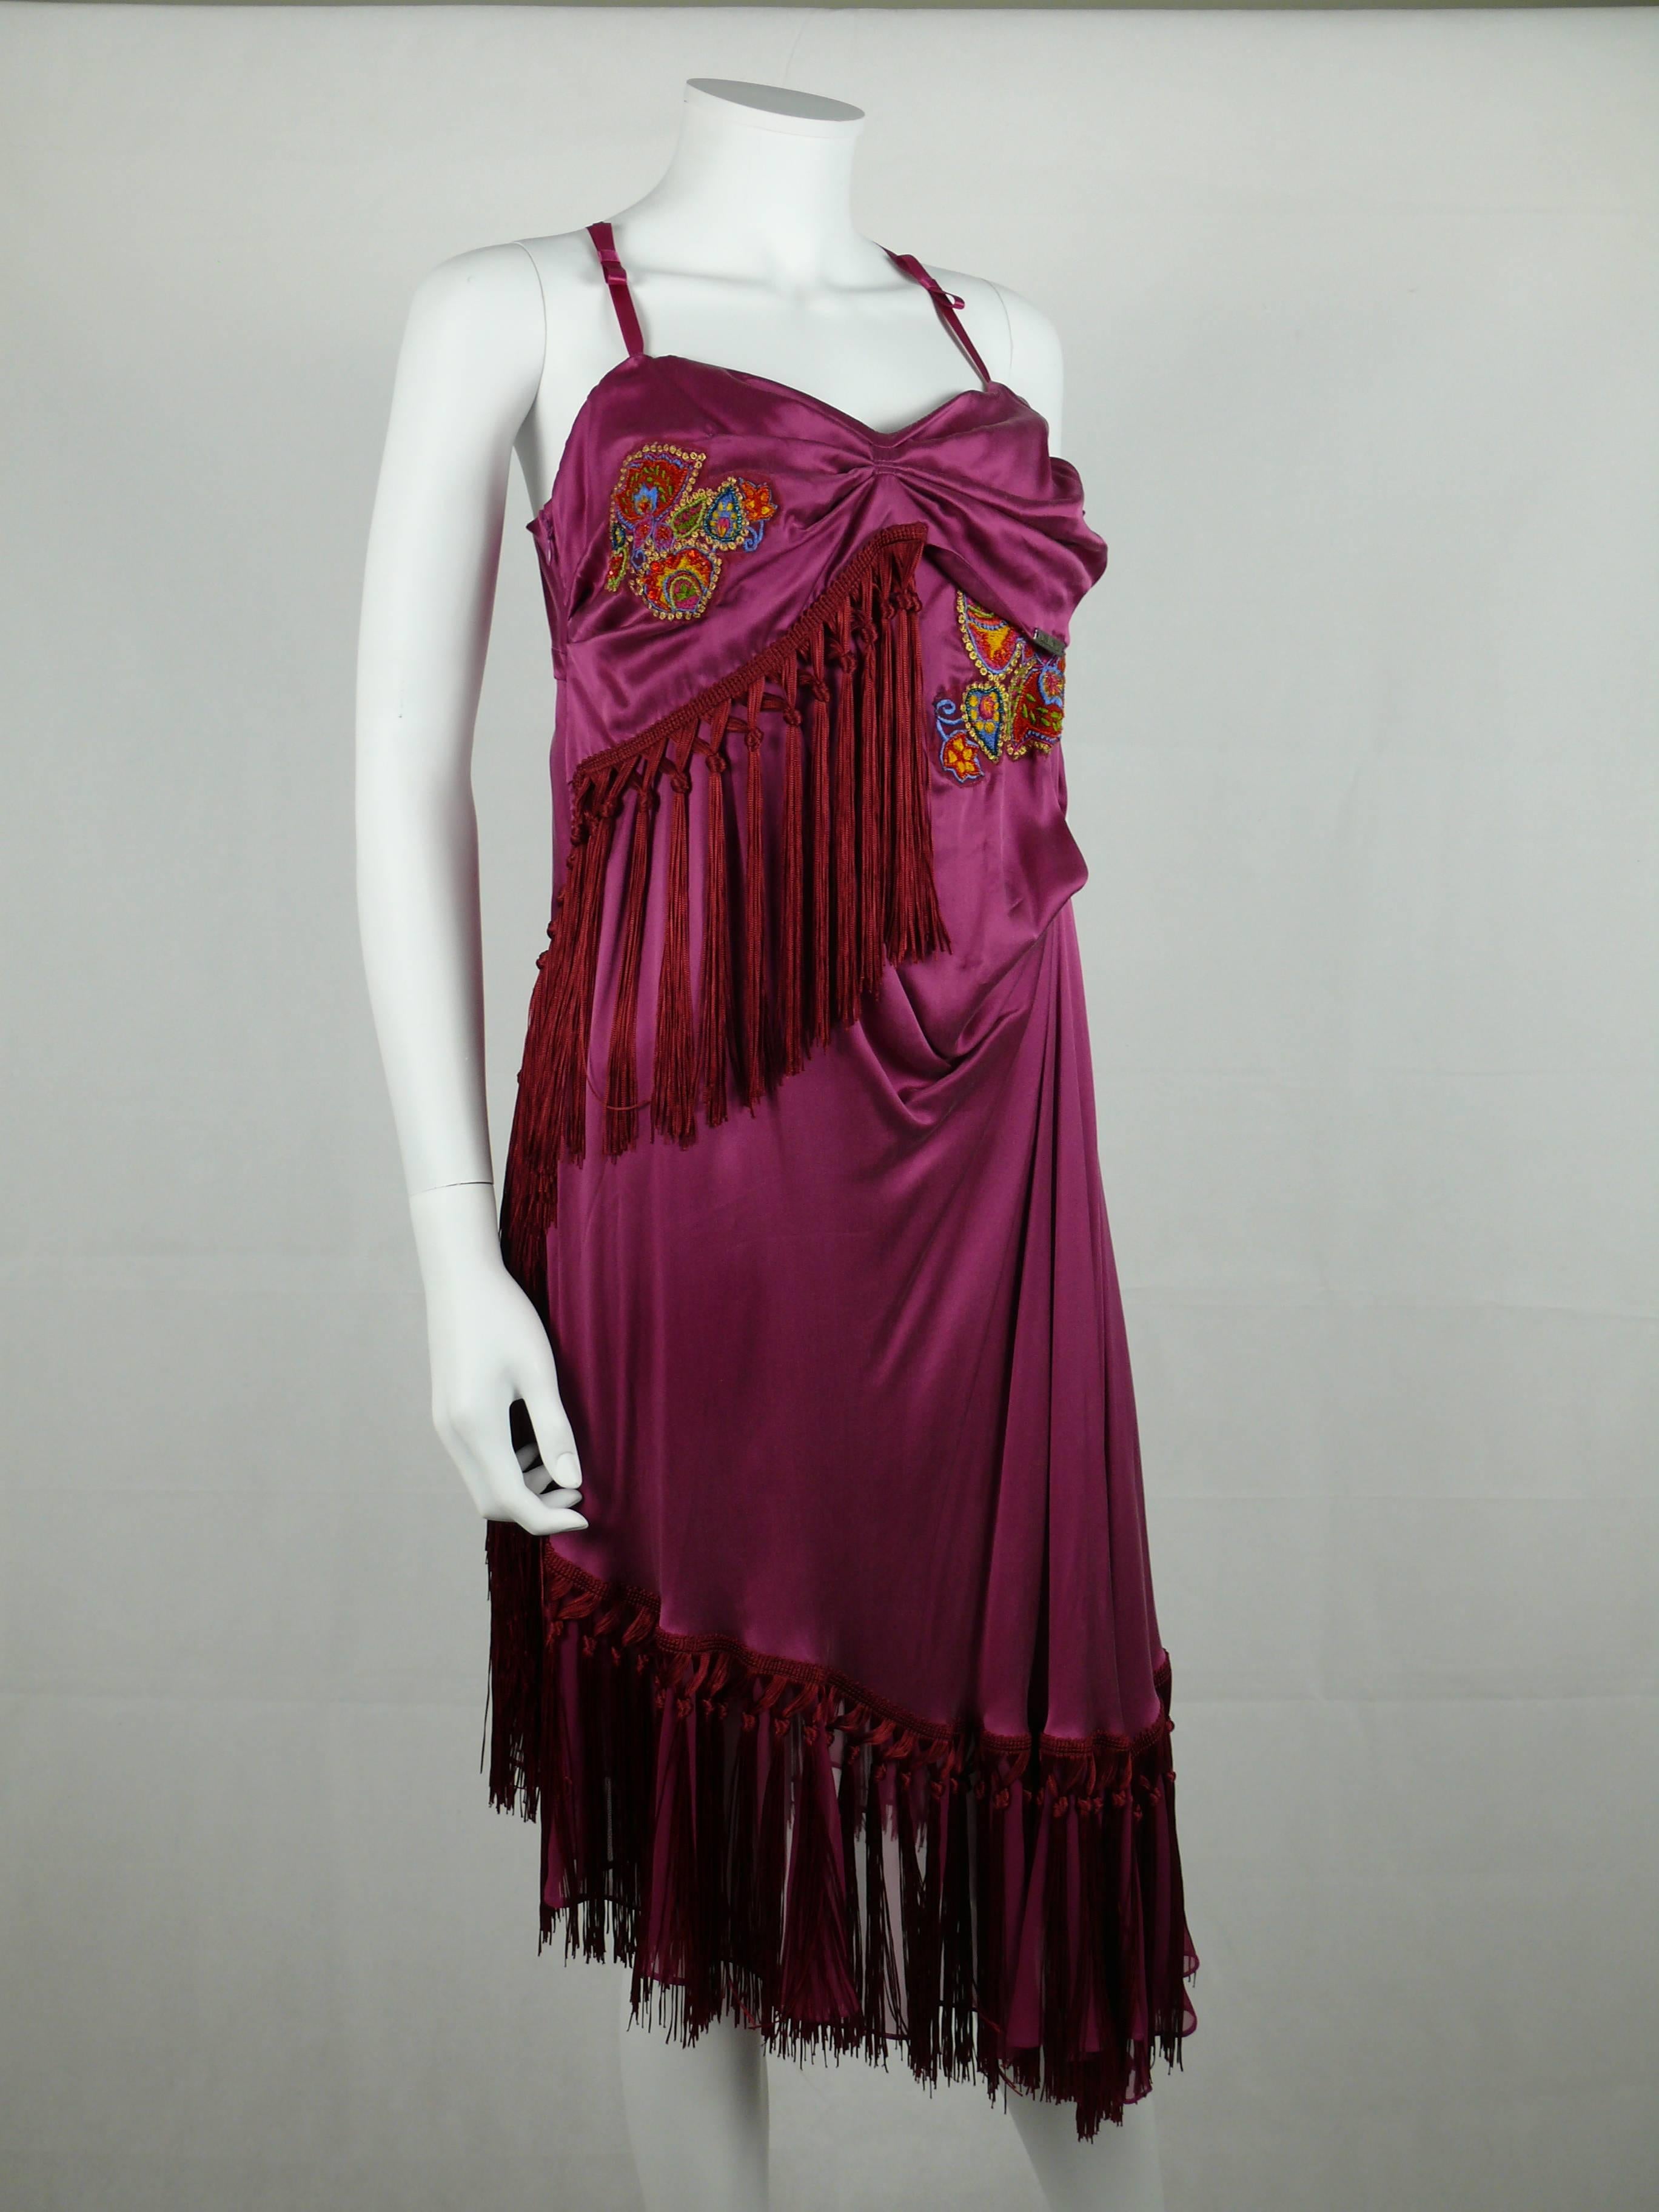 JOHN GALLIANO gorgeous bias cut silk cocktail dress with colorful embroideries, embellishement and fringes.

Label reads GALLIANO.

Size tag reads : 30/44 (corresponds to a M size - US 8 - UK 12).
Please refer to measurements.

Composition label